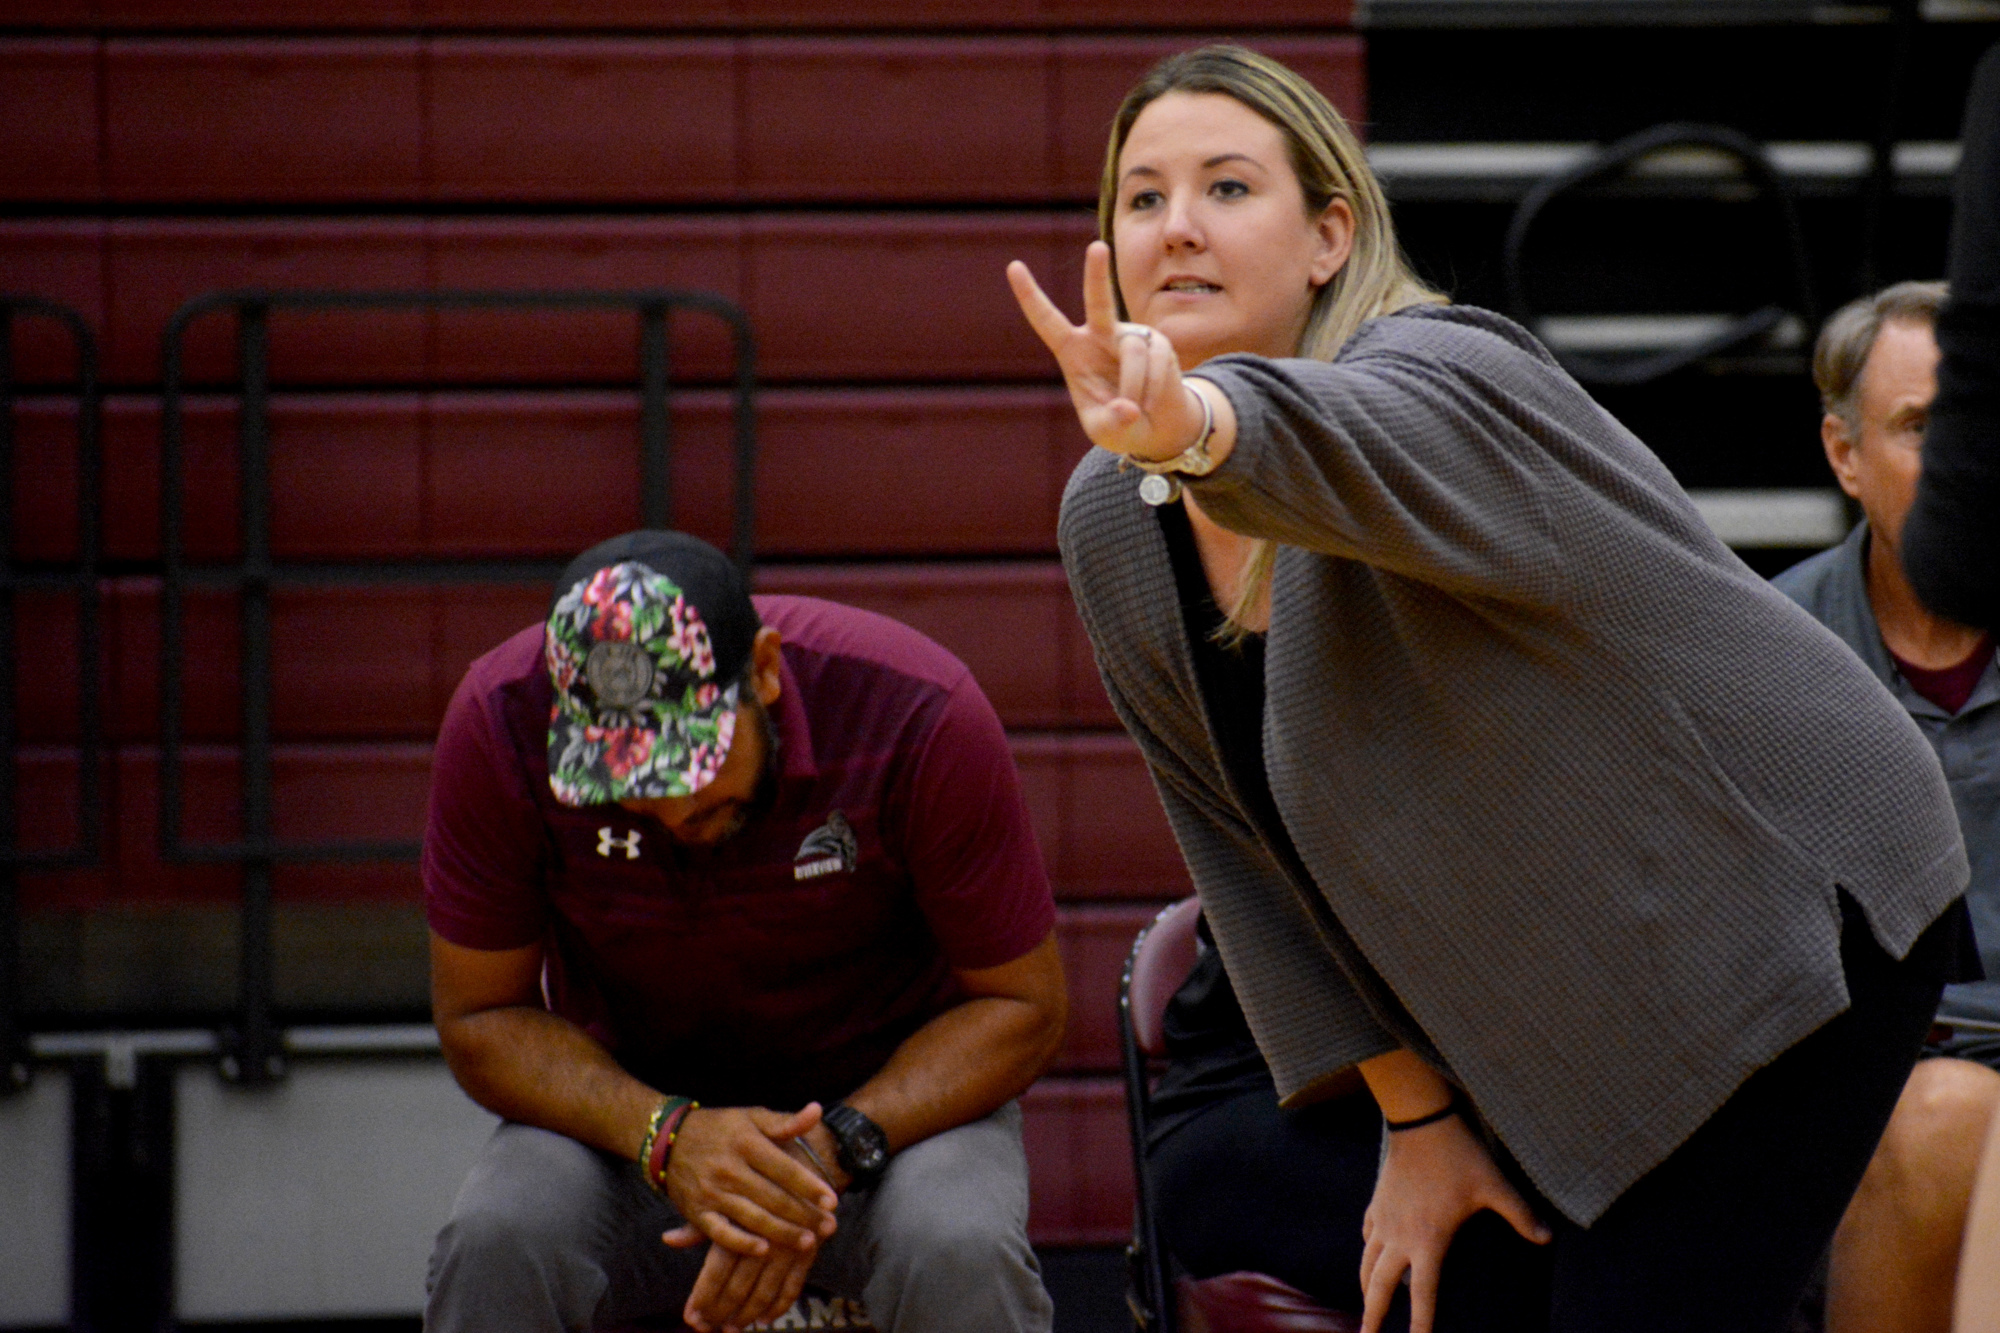 Riverview coach Nickie Halbert picked up her first career win against Venice High, her former school.